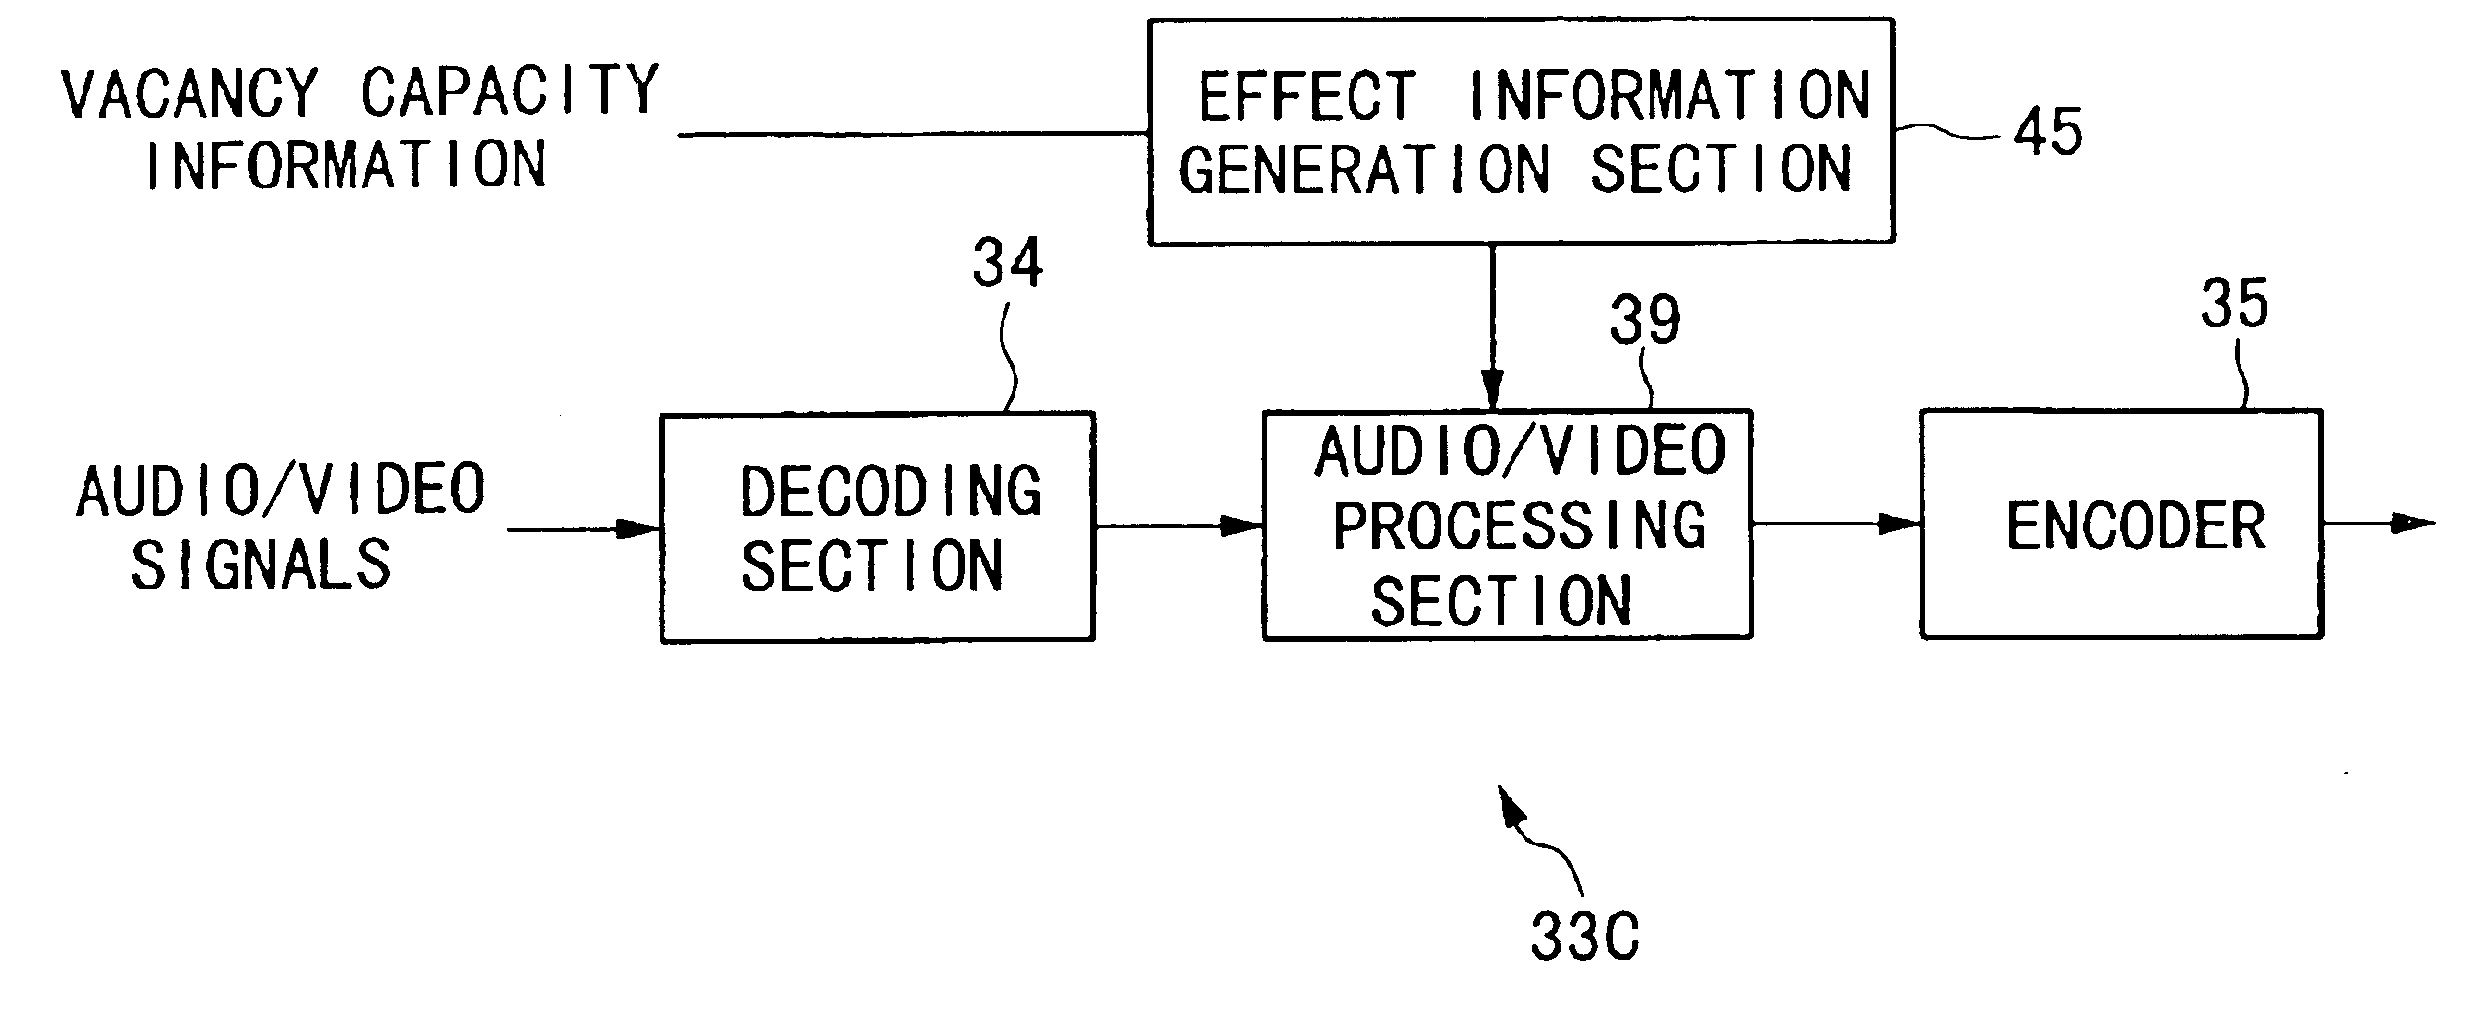 Video apparatus and re-encoder therefor